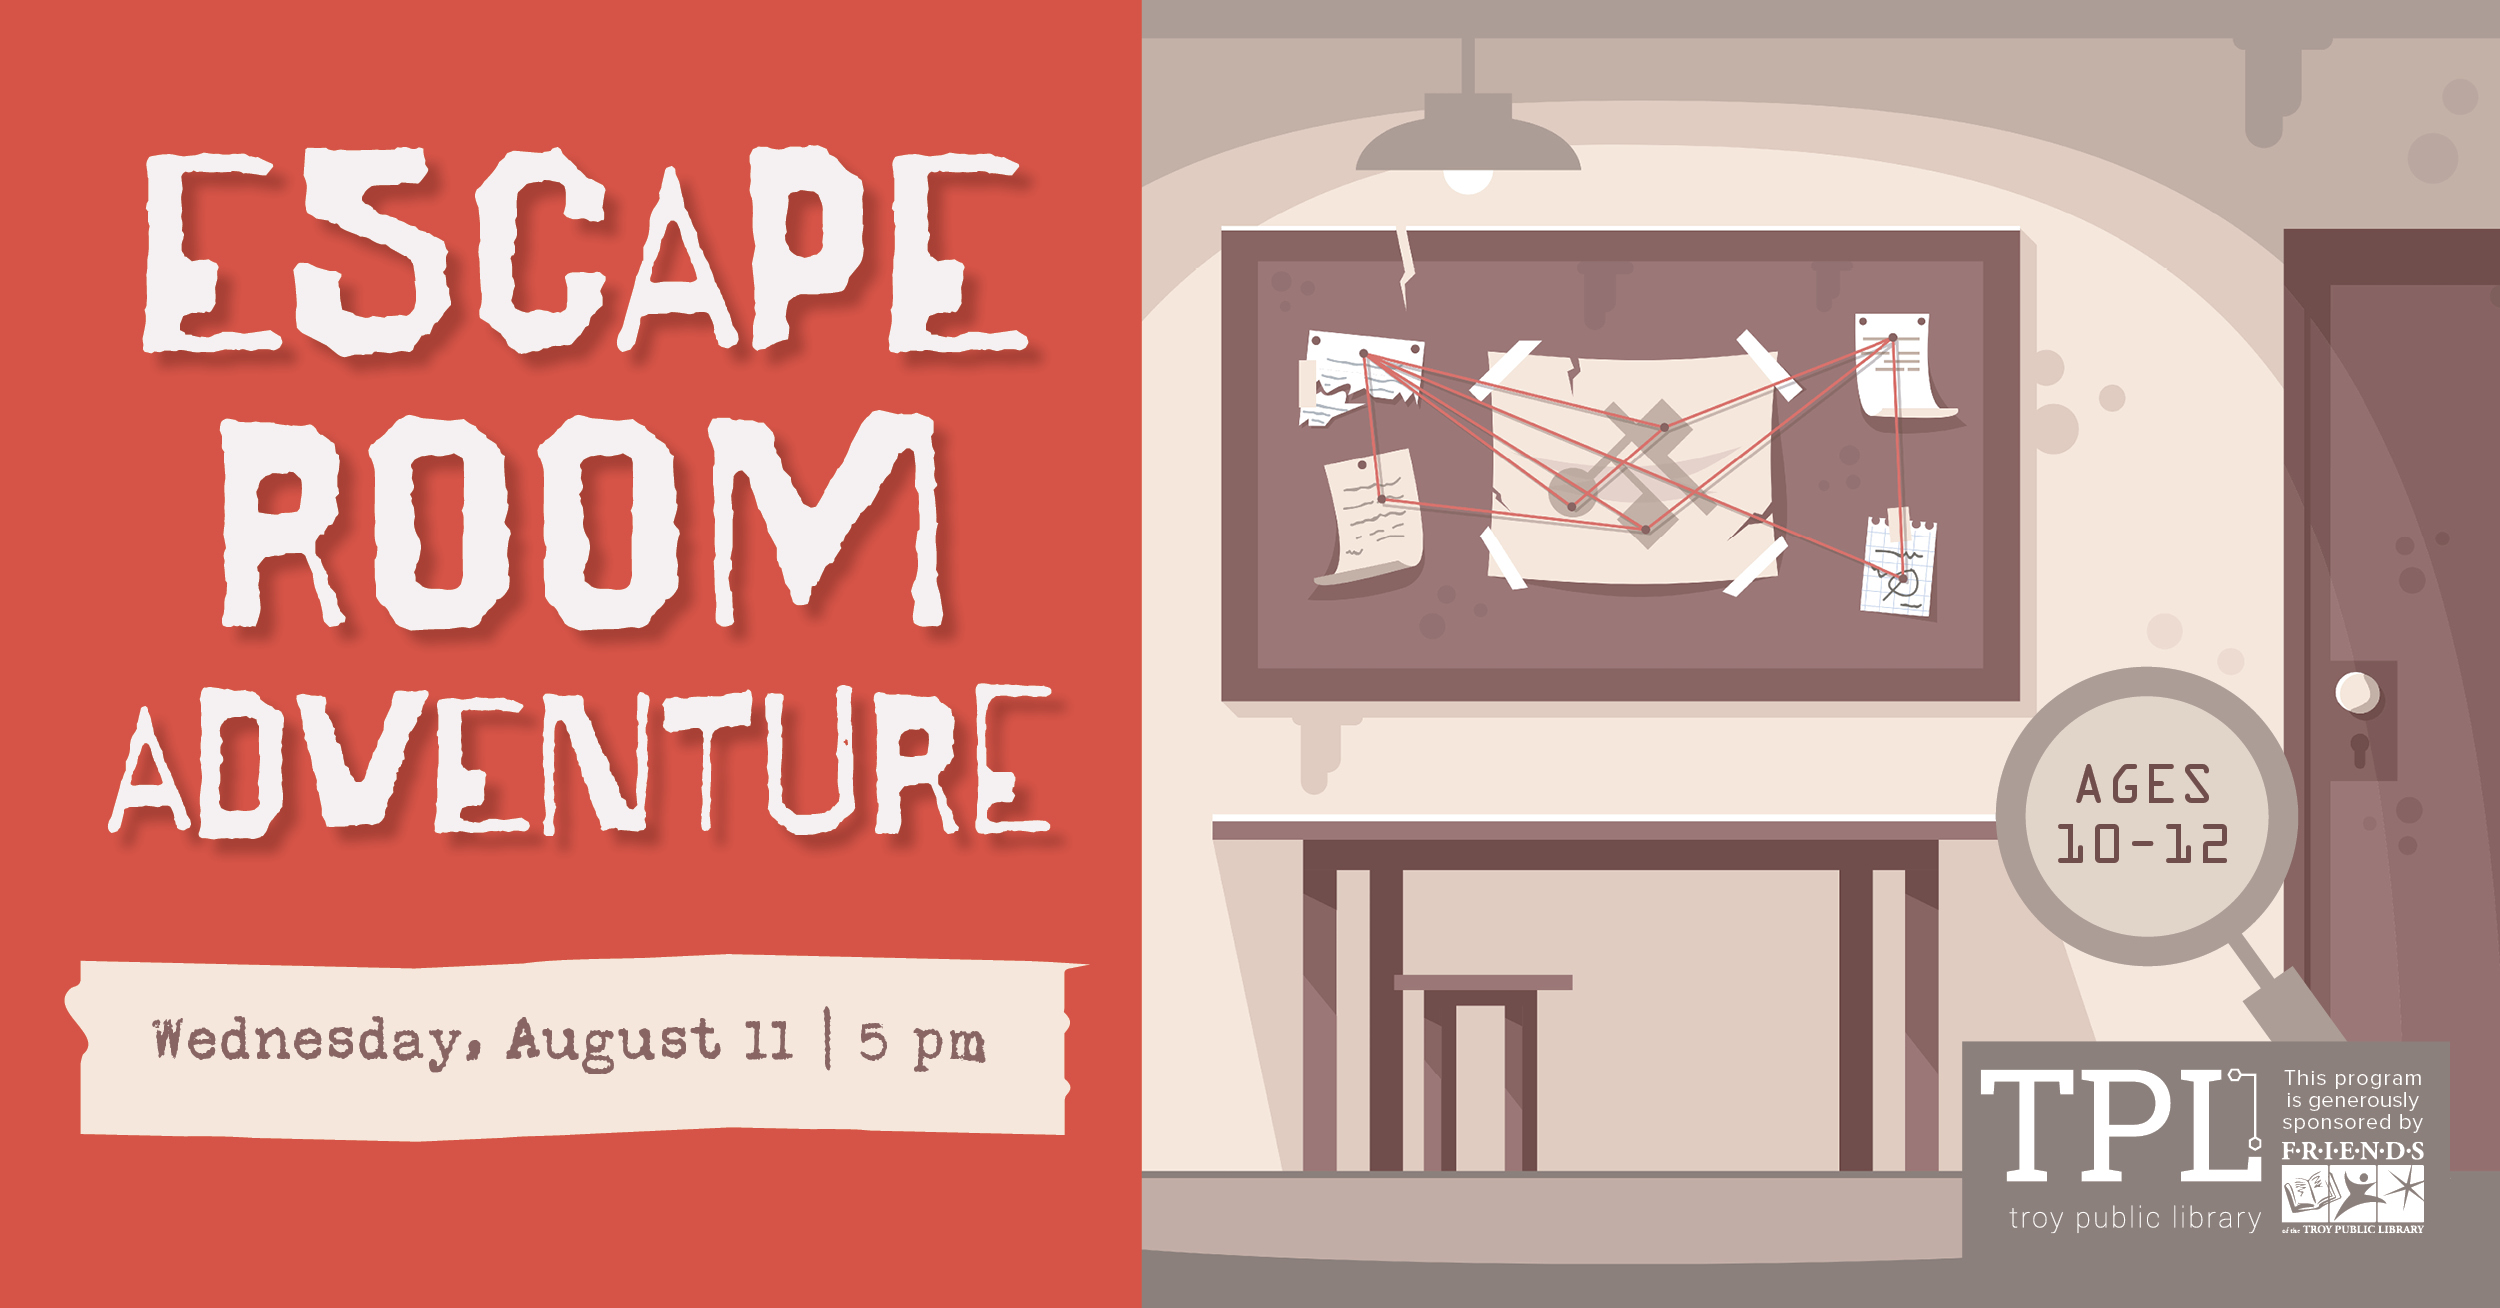 Escape Room Adventure Wednesday, August 11 at 5pm. Ages 10 to 12. Sponsored by the Friends of the Troy Public Library